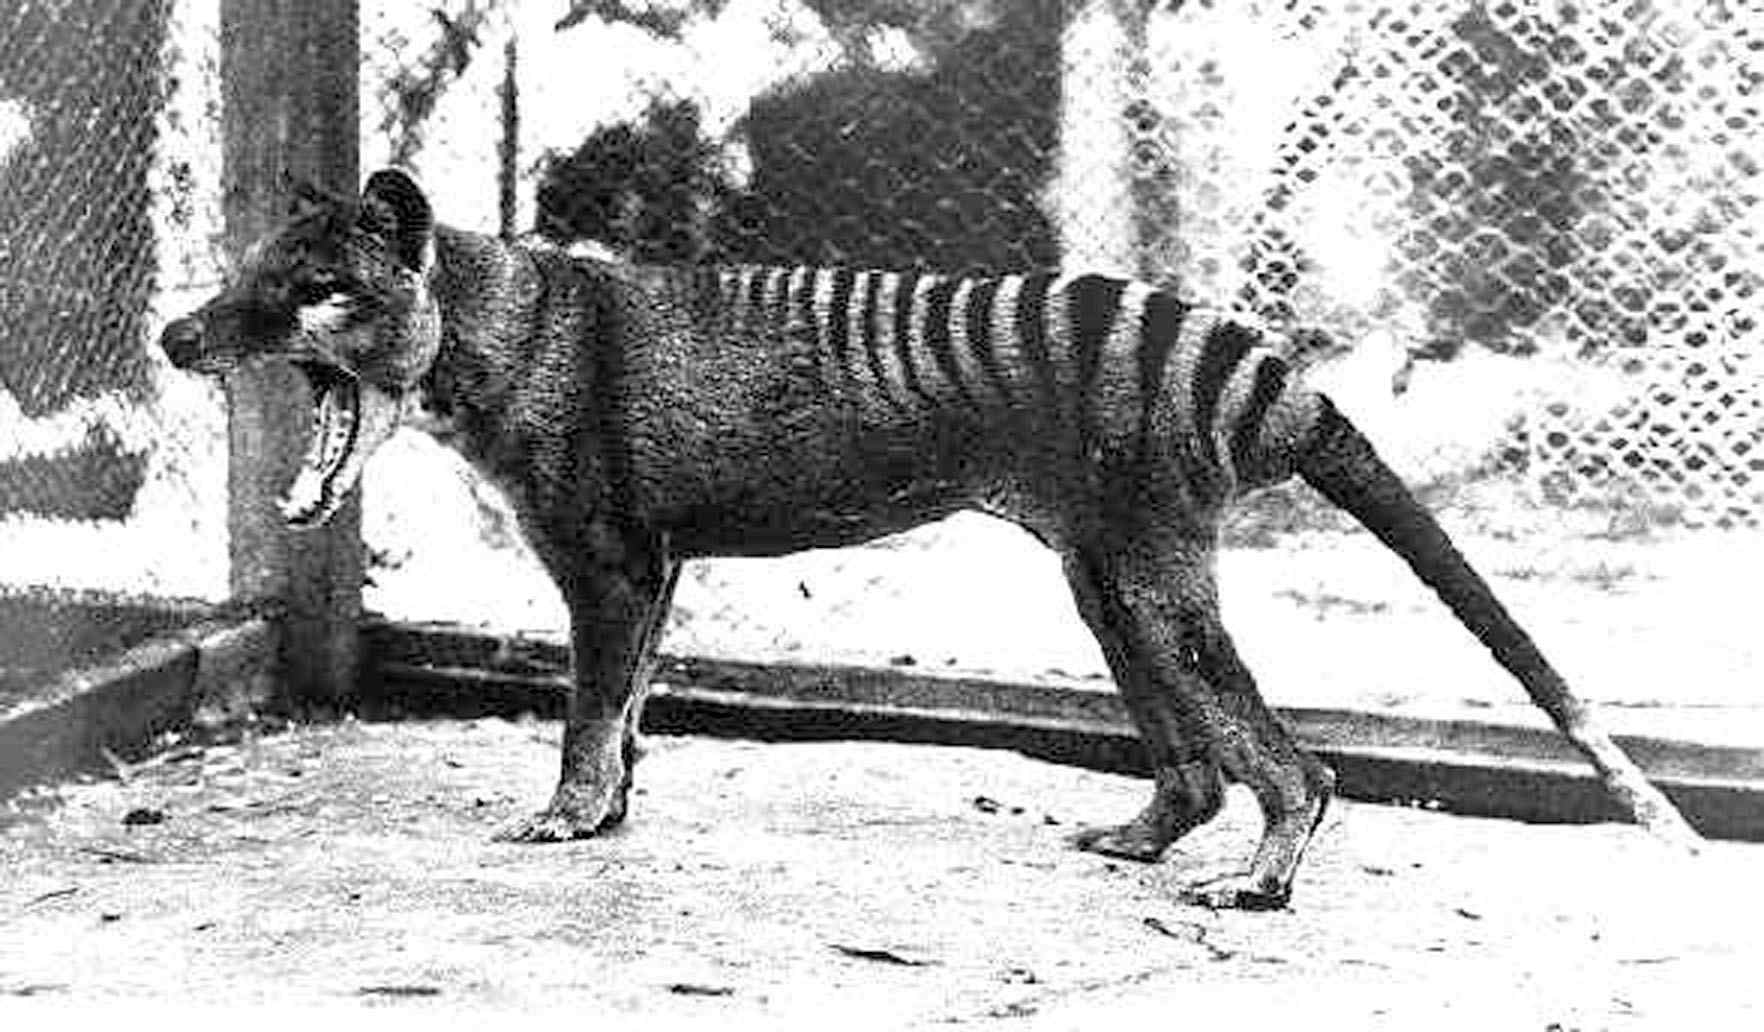 Facts About the Tasmanian Tiger